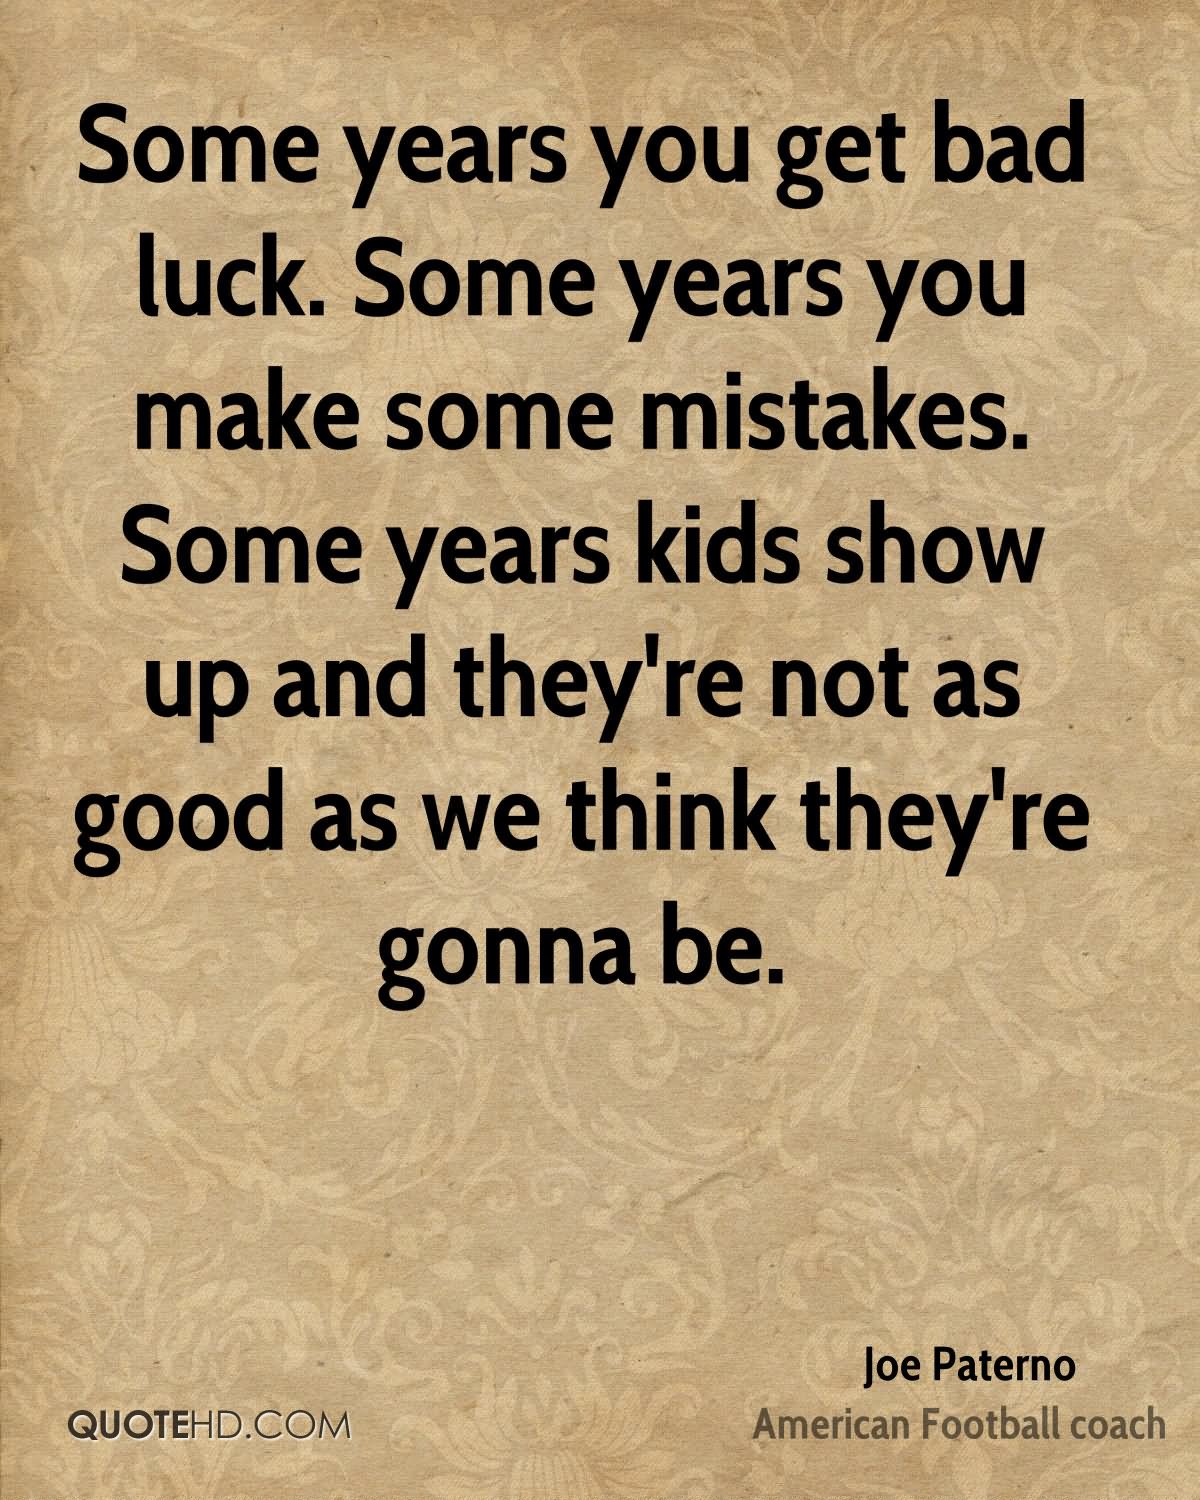 Some years you get bad luck. Some years you make some mistakes. Some years kids show up and they're not as good as we think they're gonna be